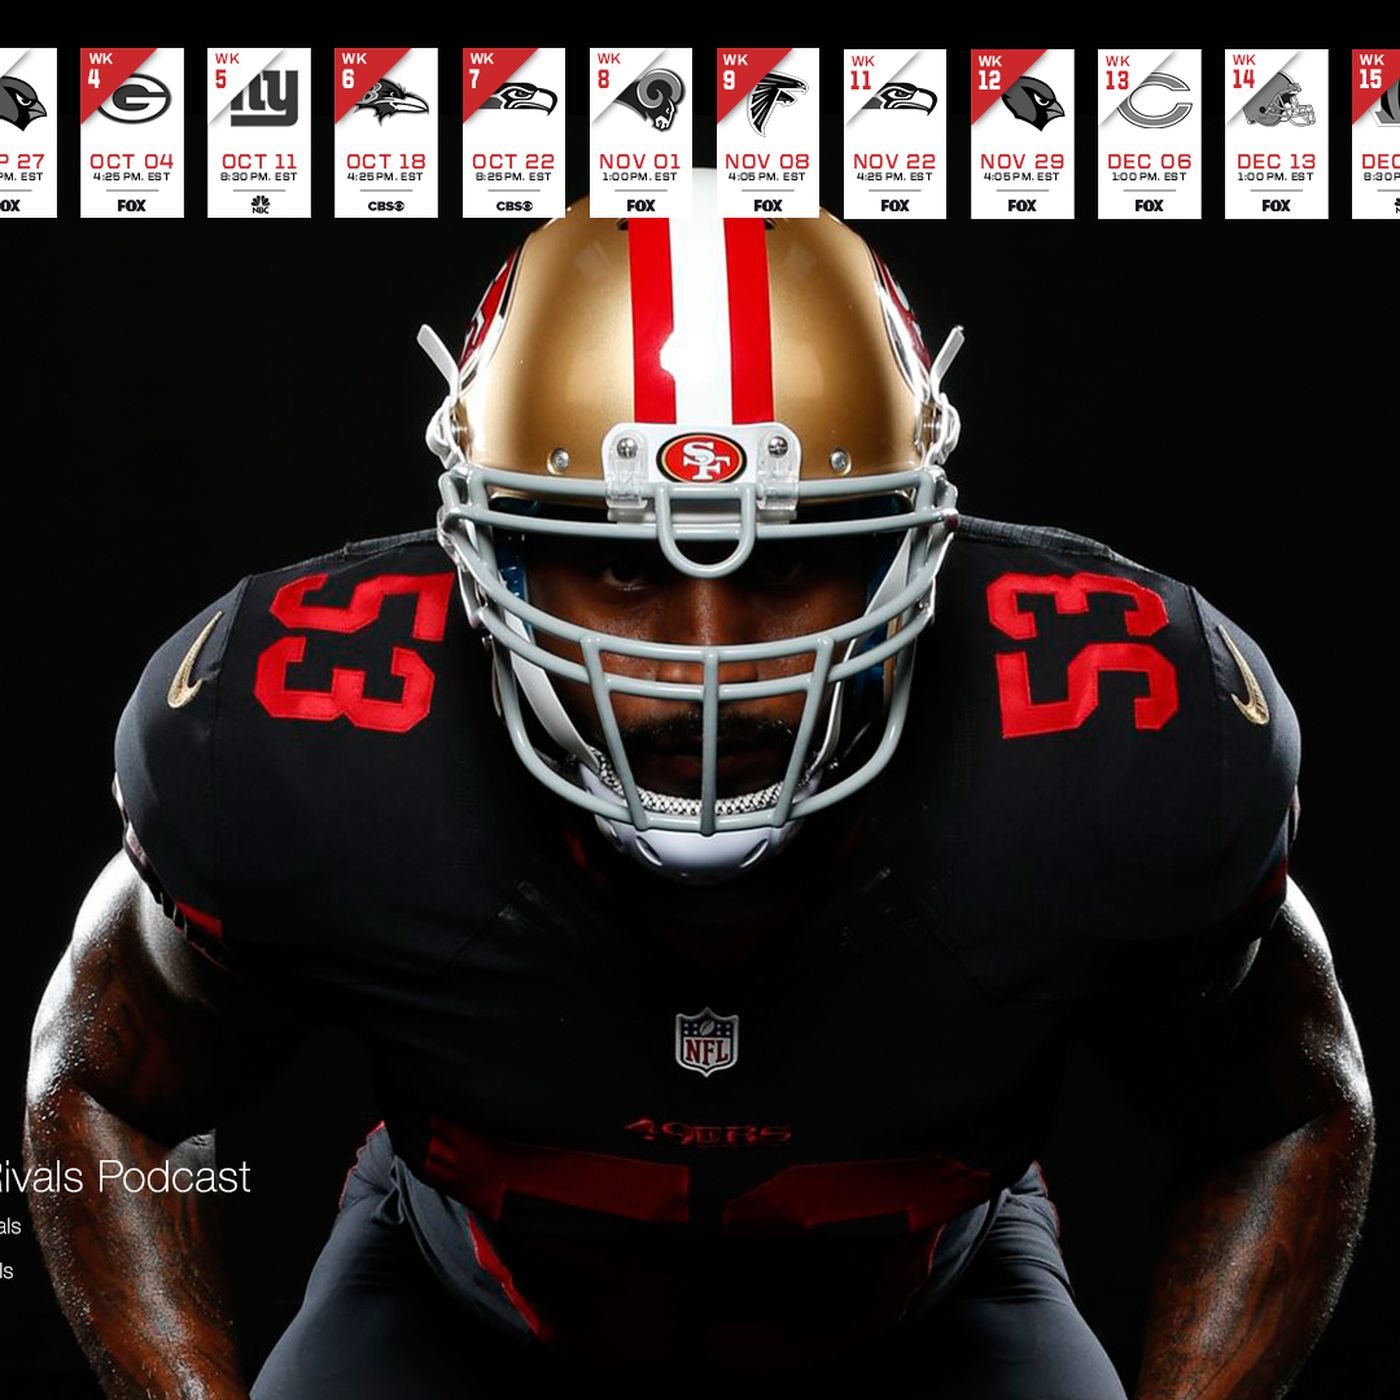 49ers screen background